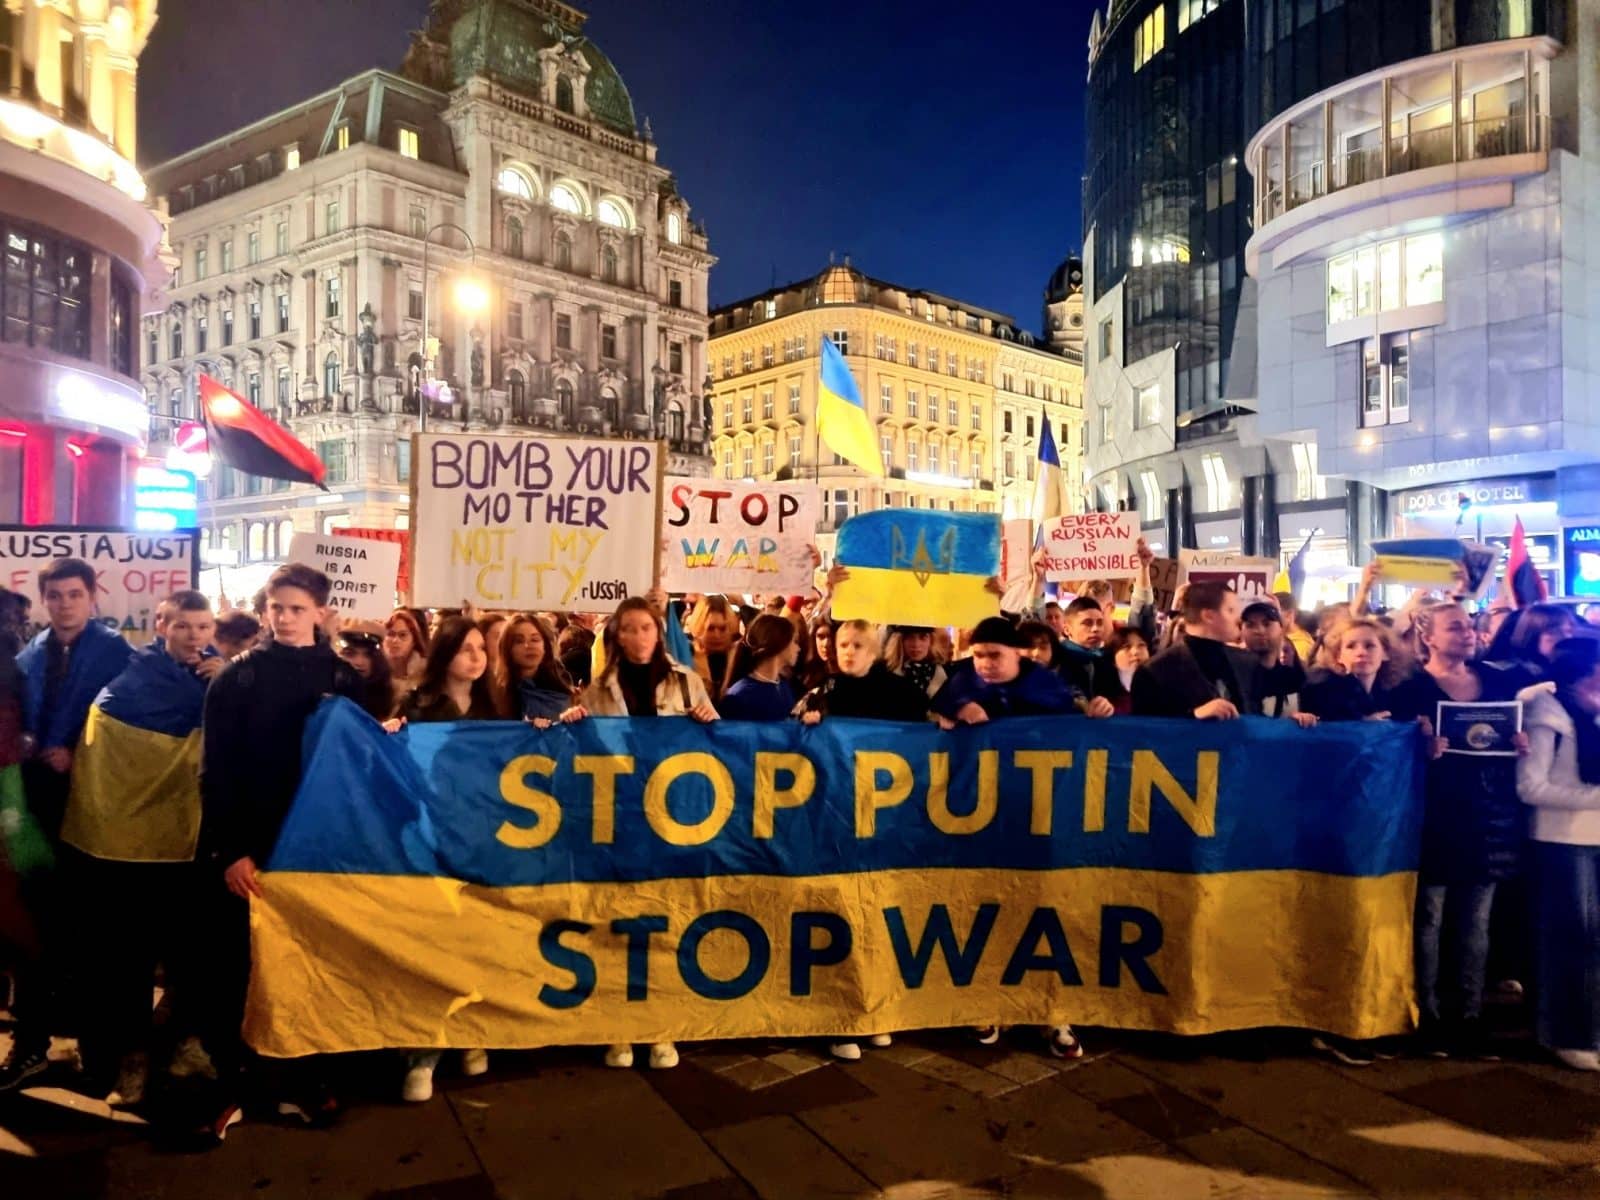 People in European cities went to protest actions after Russian missile strikes on Ukraine